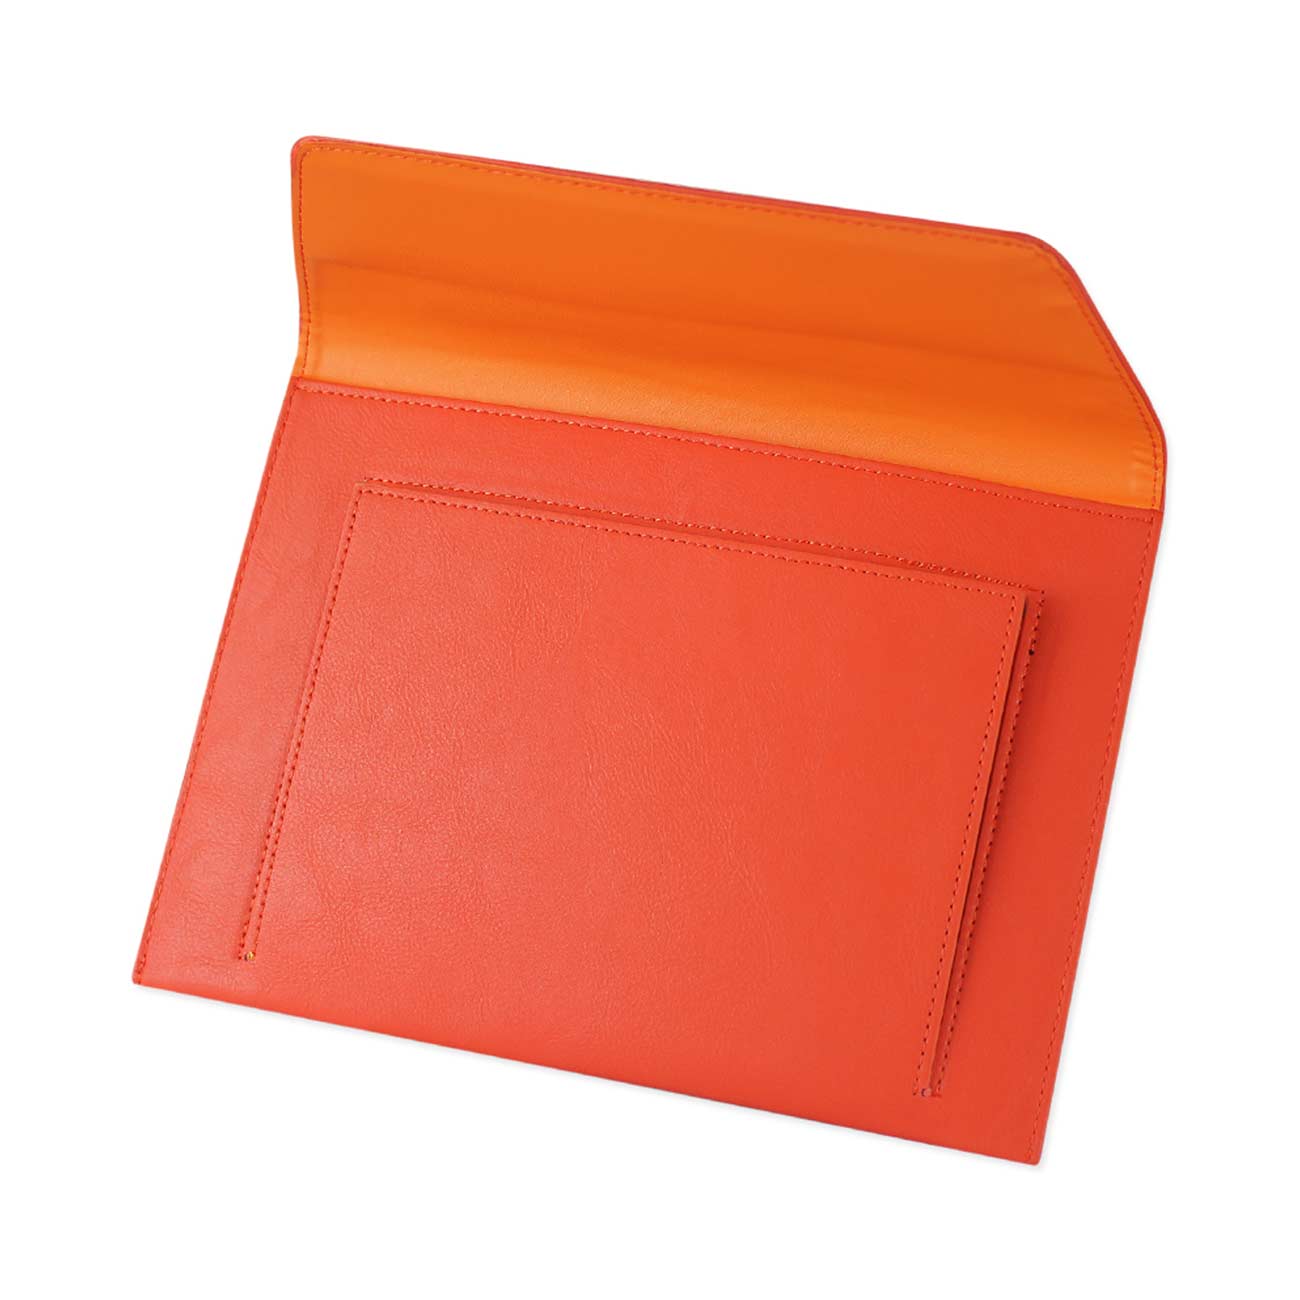 REIKO PREMIUM LEATHER CASE POUCH FOR 8.2INCHES IPADS AND TABLETS In ORANGE